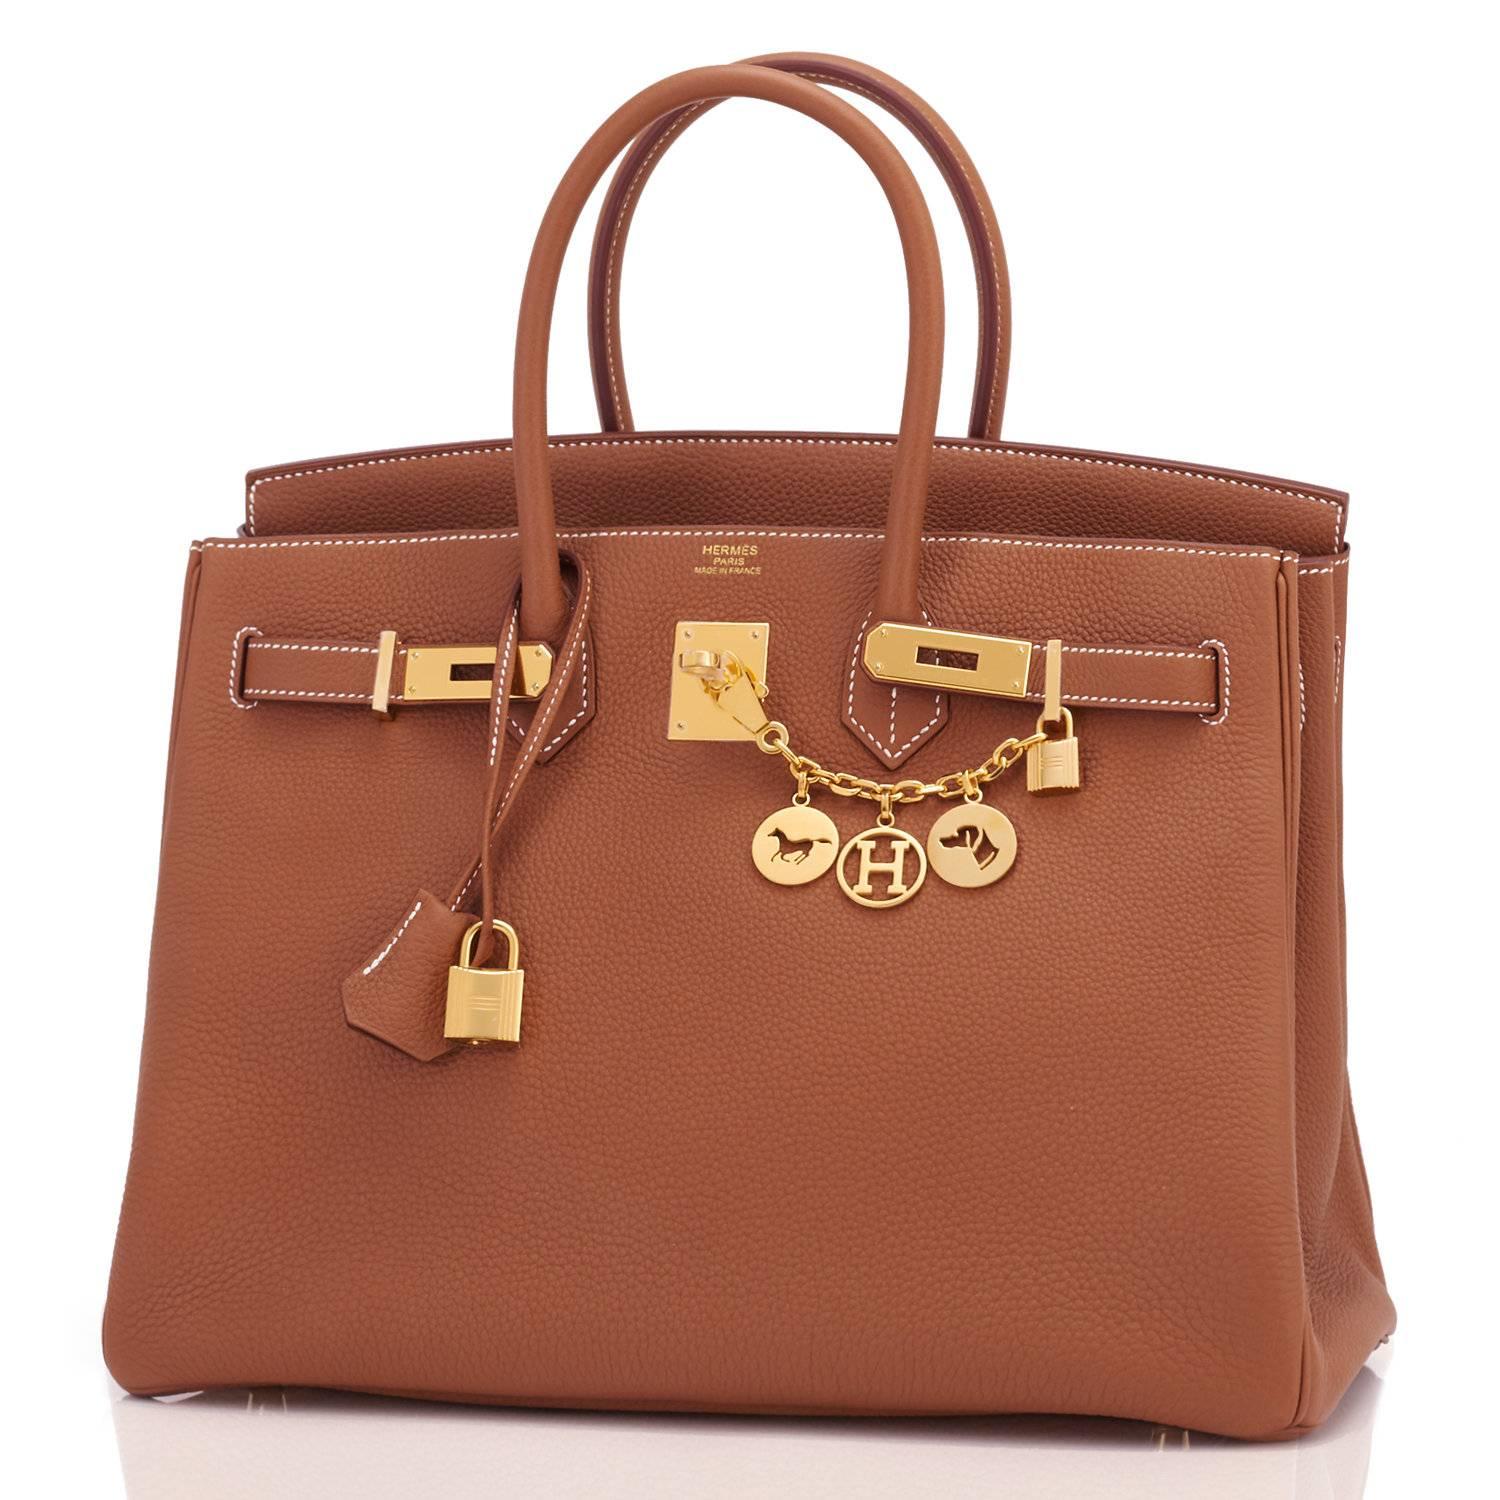 Hermes Gold Togo Camel Tan 35cm Birkin Gold Hardware C Stamp 
Brand New in Box. Store Fresh. Pristine Condition (with plastic on hardware). 
Just purchased from Hermes store; bag bears new interior C stamp.
Perfect gift! Comes with lock, keys,